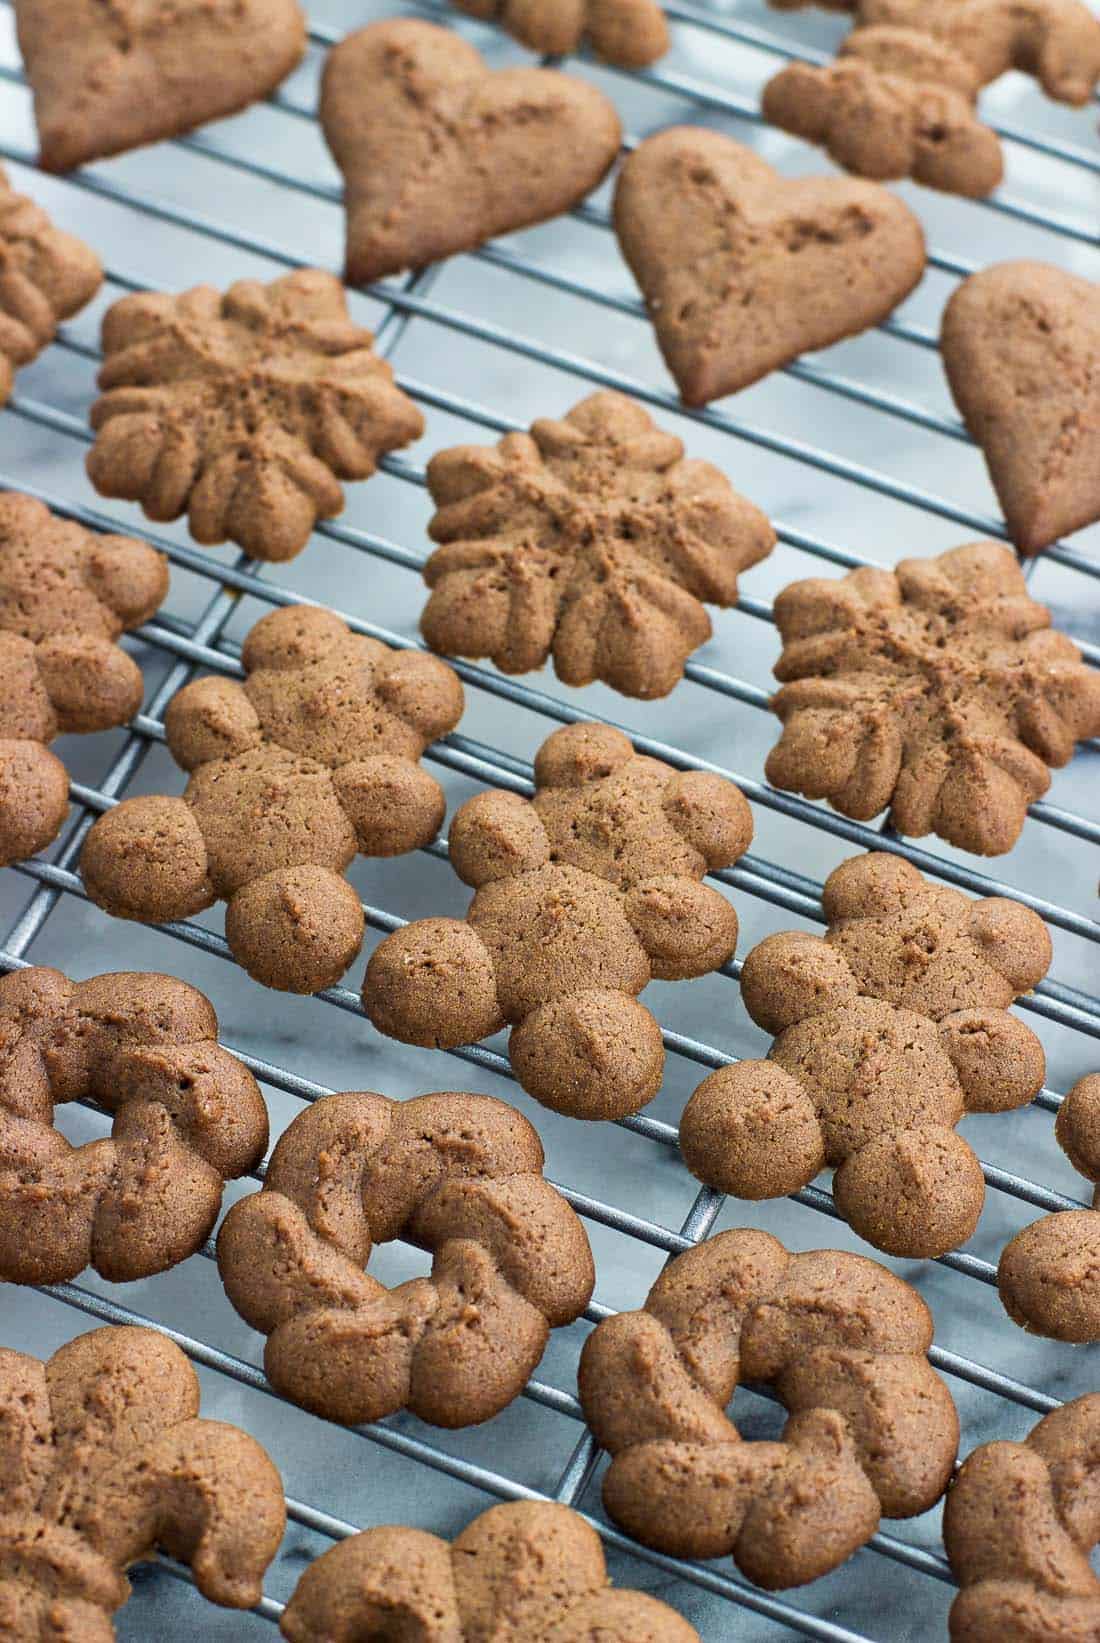 A close-up view of an assortment of shaped cookies on a rack, including a teddy bear shape, a wreath, a snowflake, and a heart.